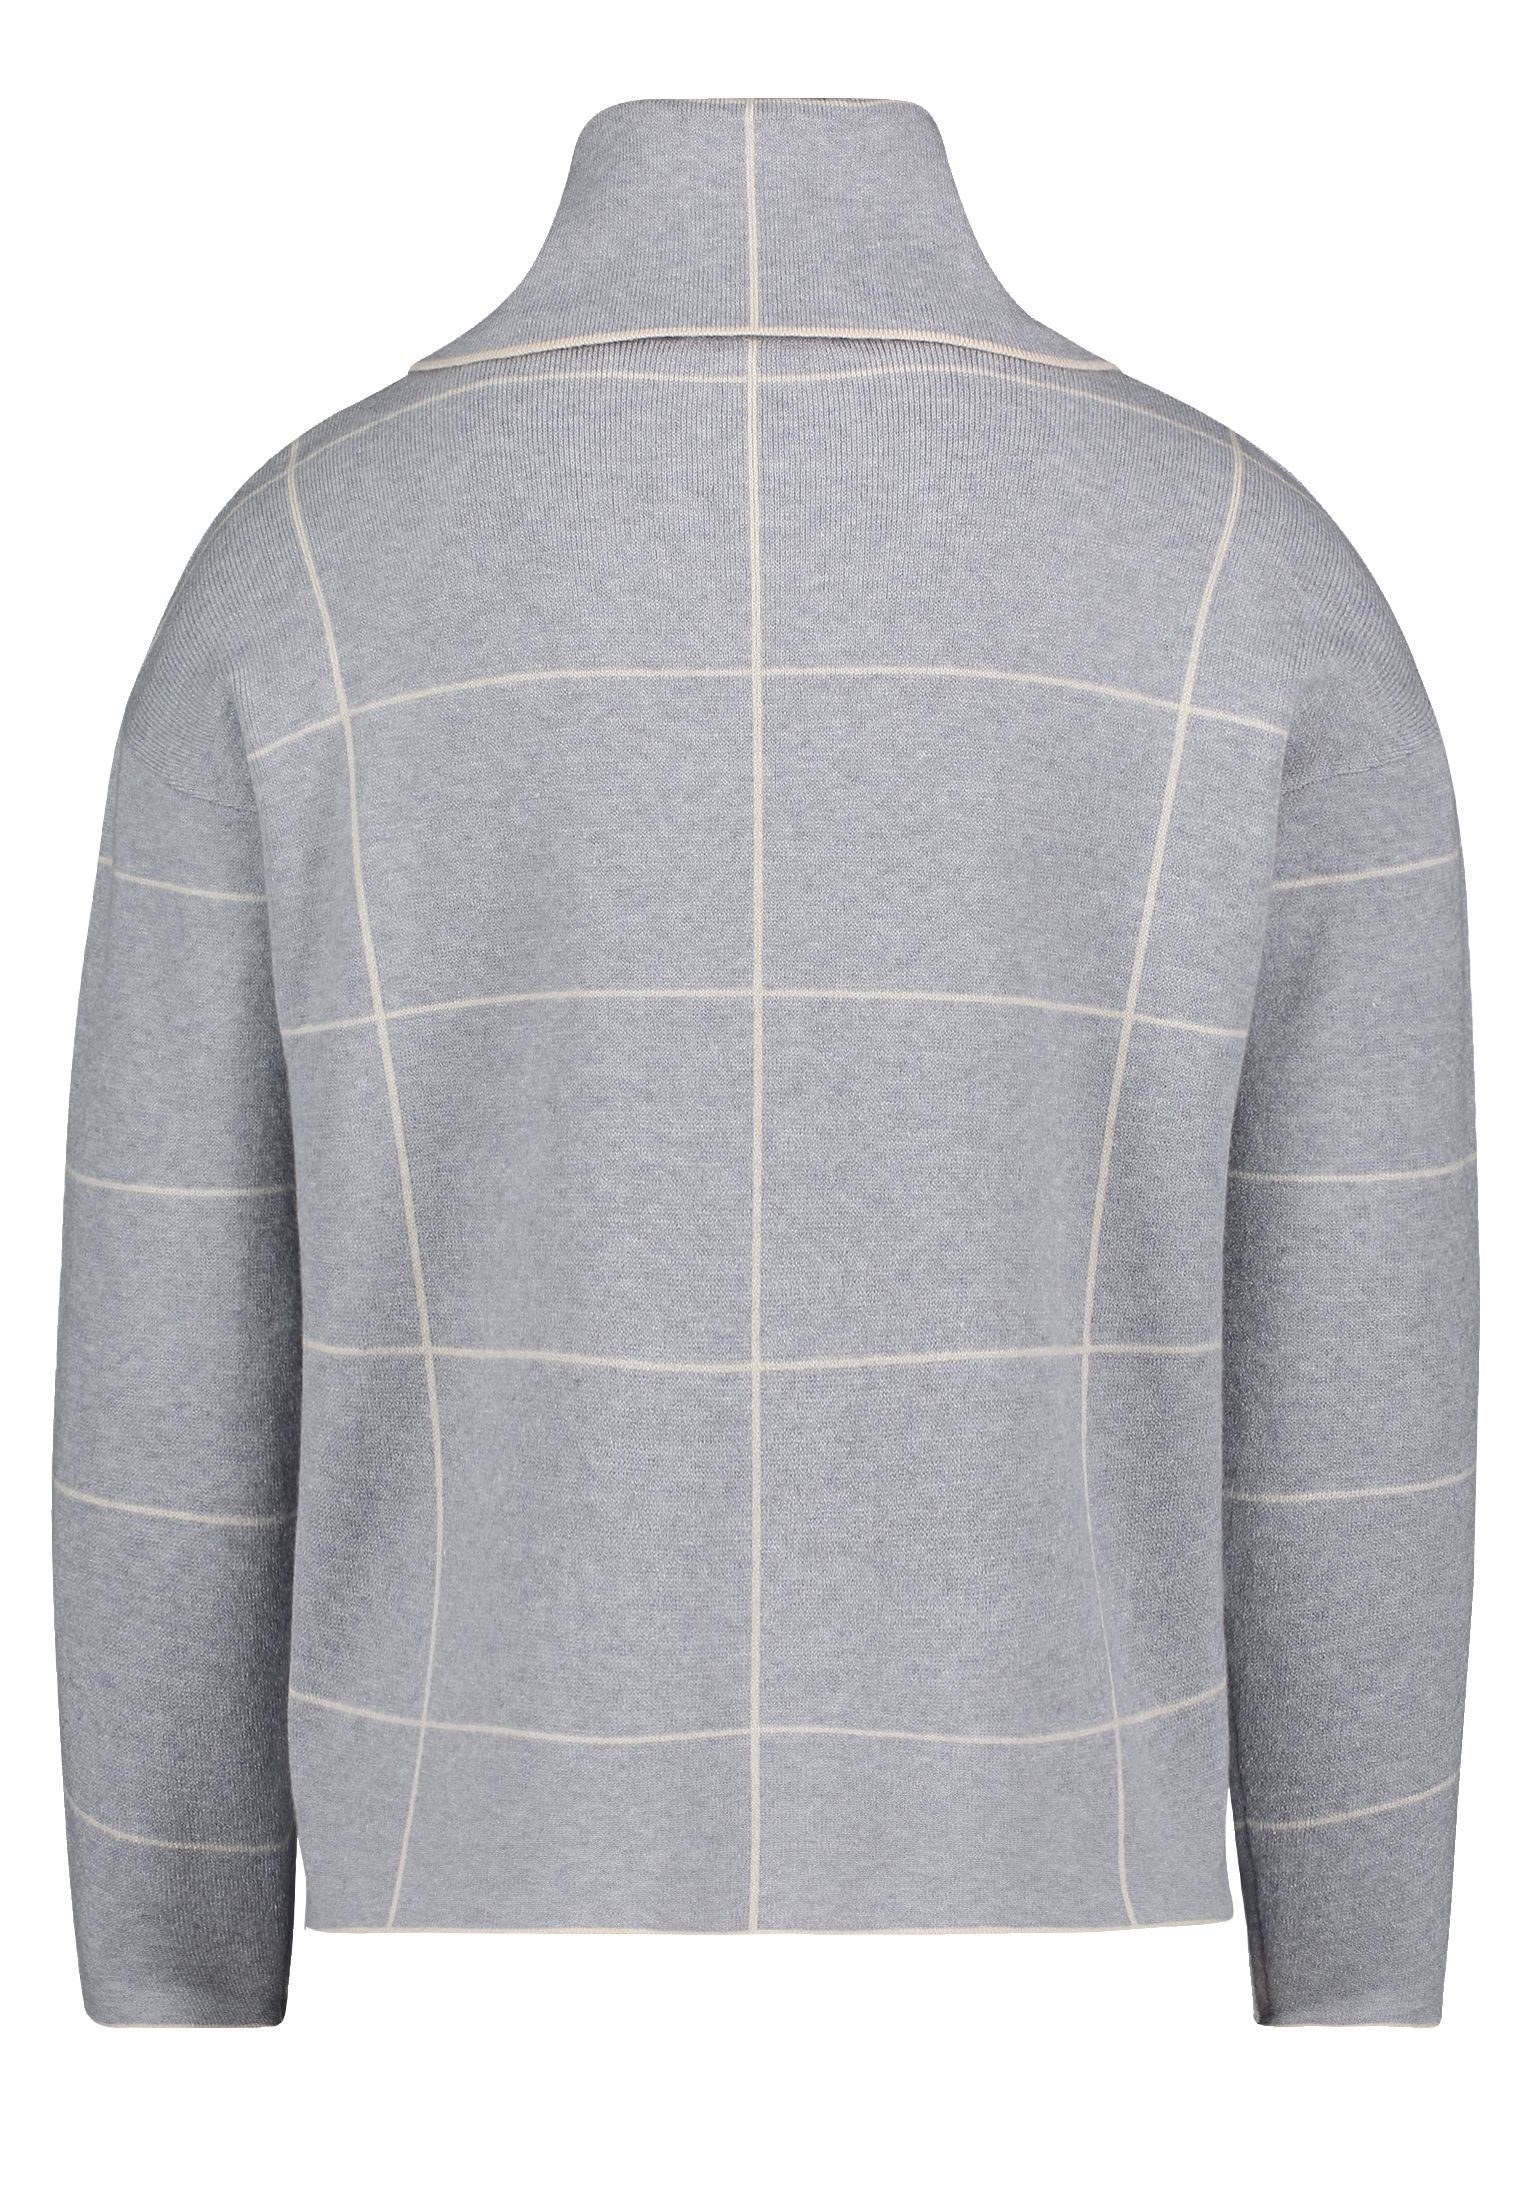 patch Barclay Betty grey/beige Strickpullover